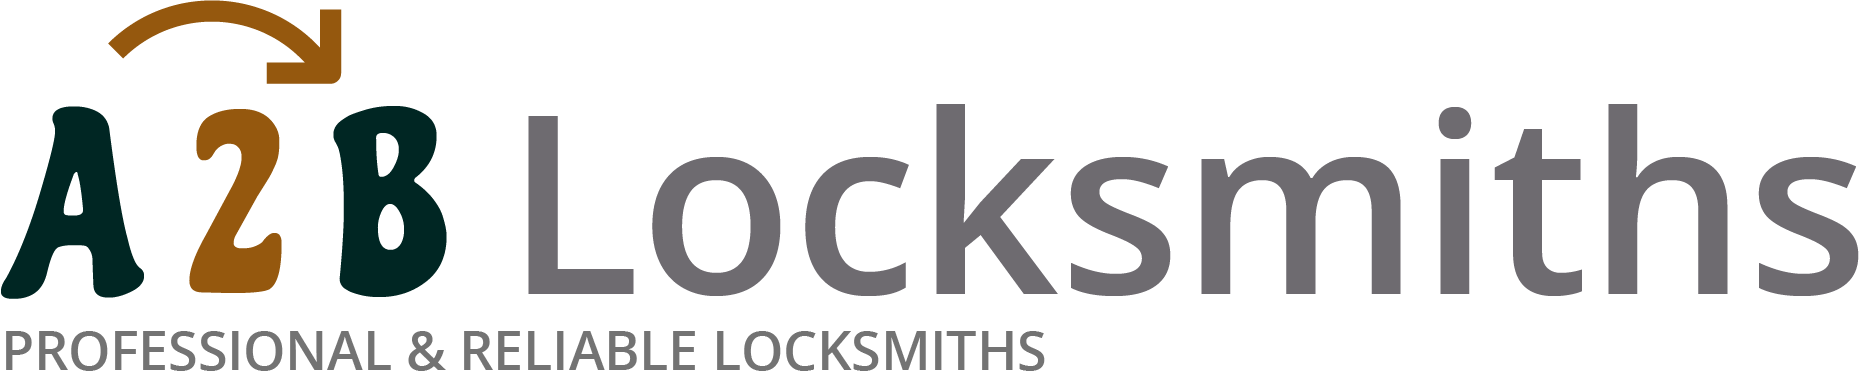 If you are locked out of house in Worksop, our 24/7 local emergency locksmith services can help you.